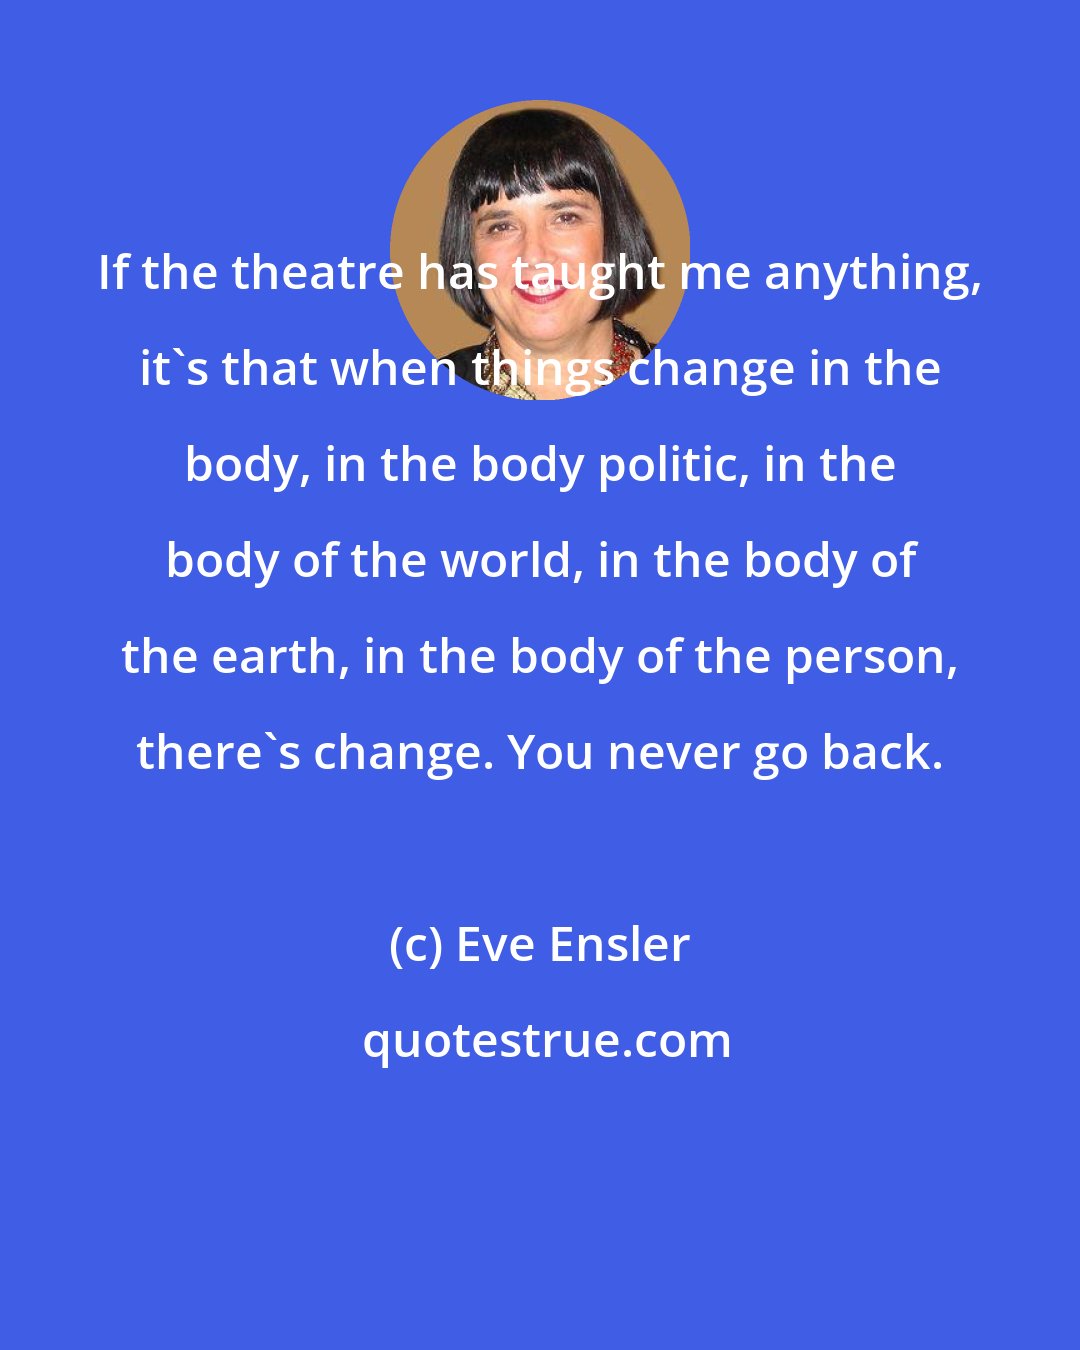 Eve Ensler: If the theatre has taught me anything, it's that when things change in the body, in the body politic, in the body of the world, in the body of the earth, in the body of the person, there's change. You never go back.